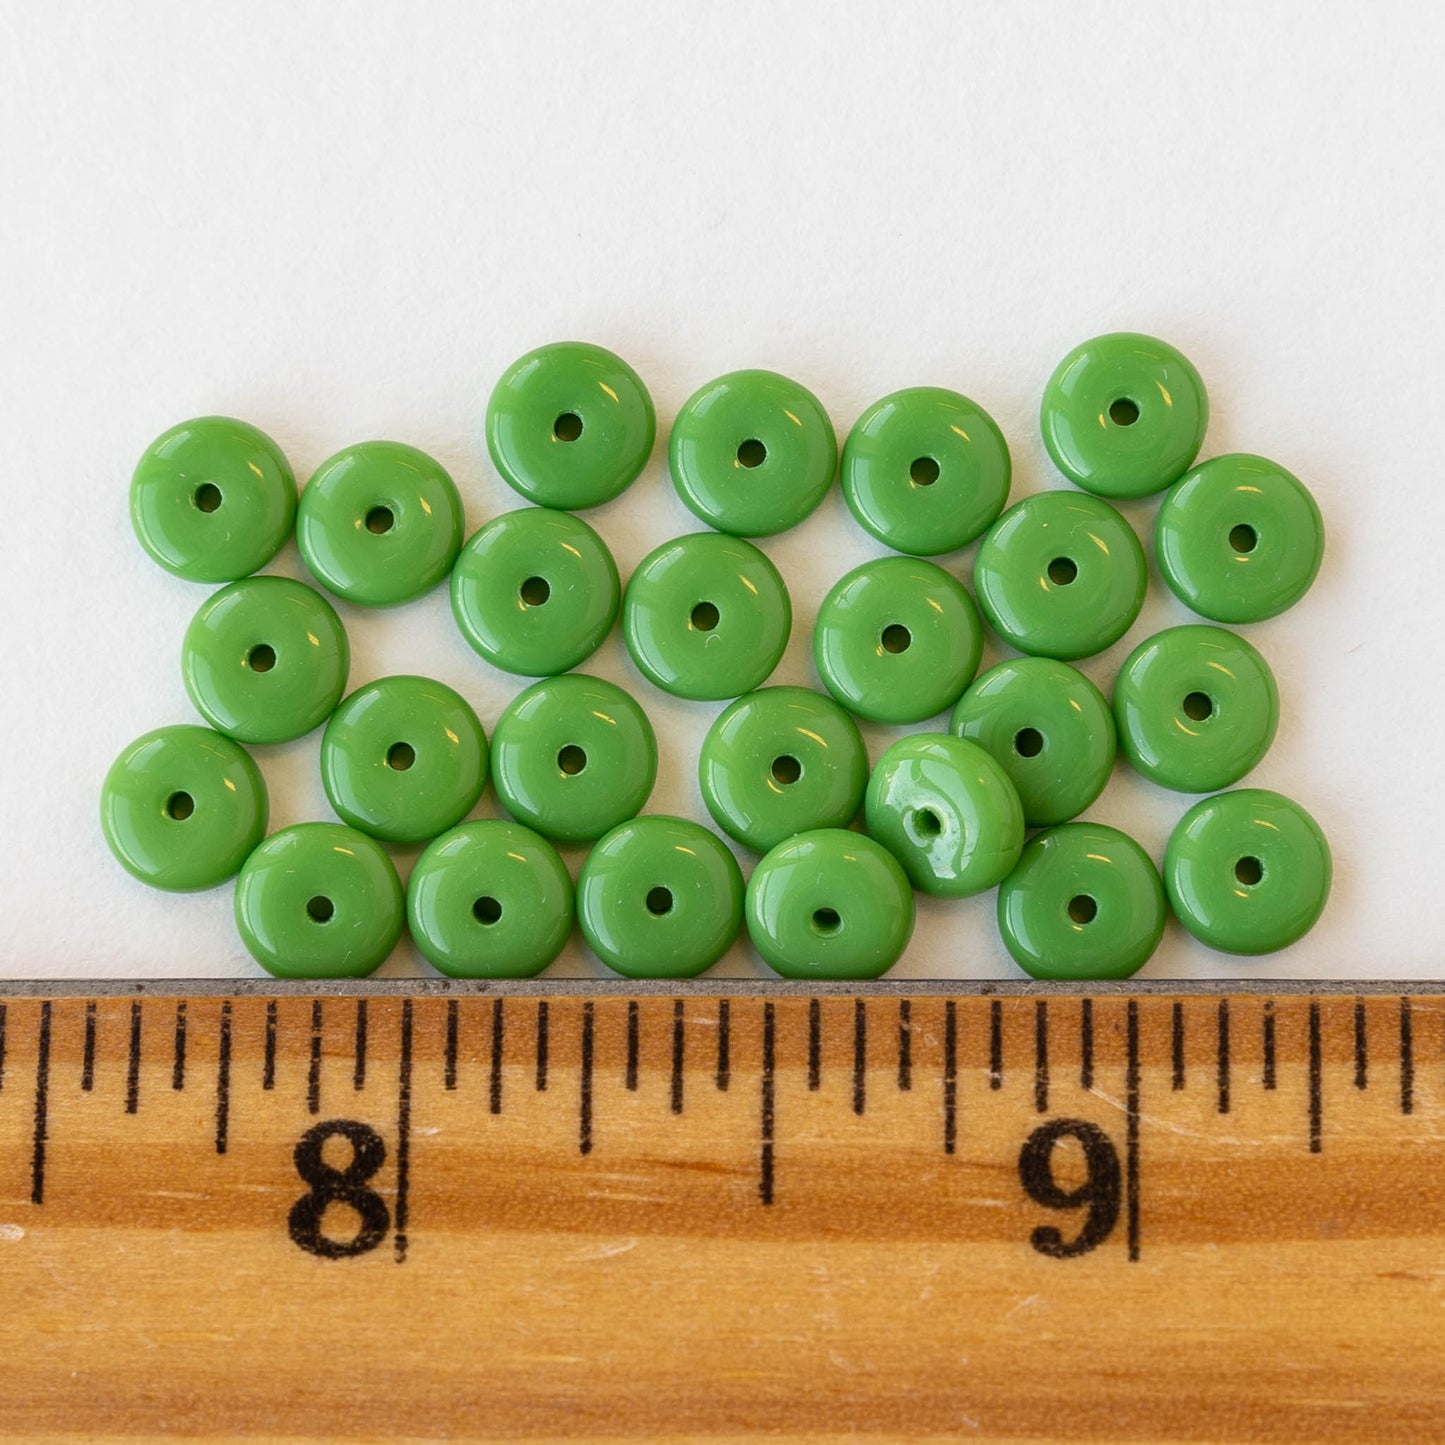 6mm Glass Rondelle Beads - Opaque Green - 50 Beads